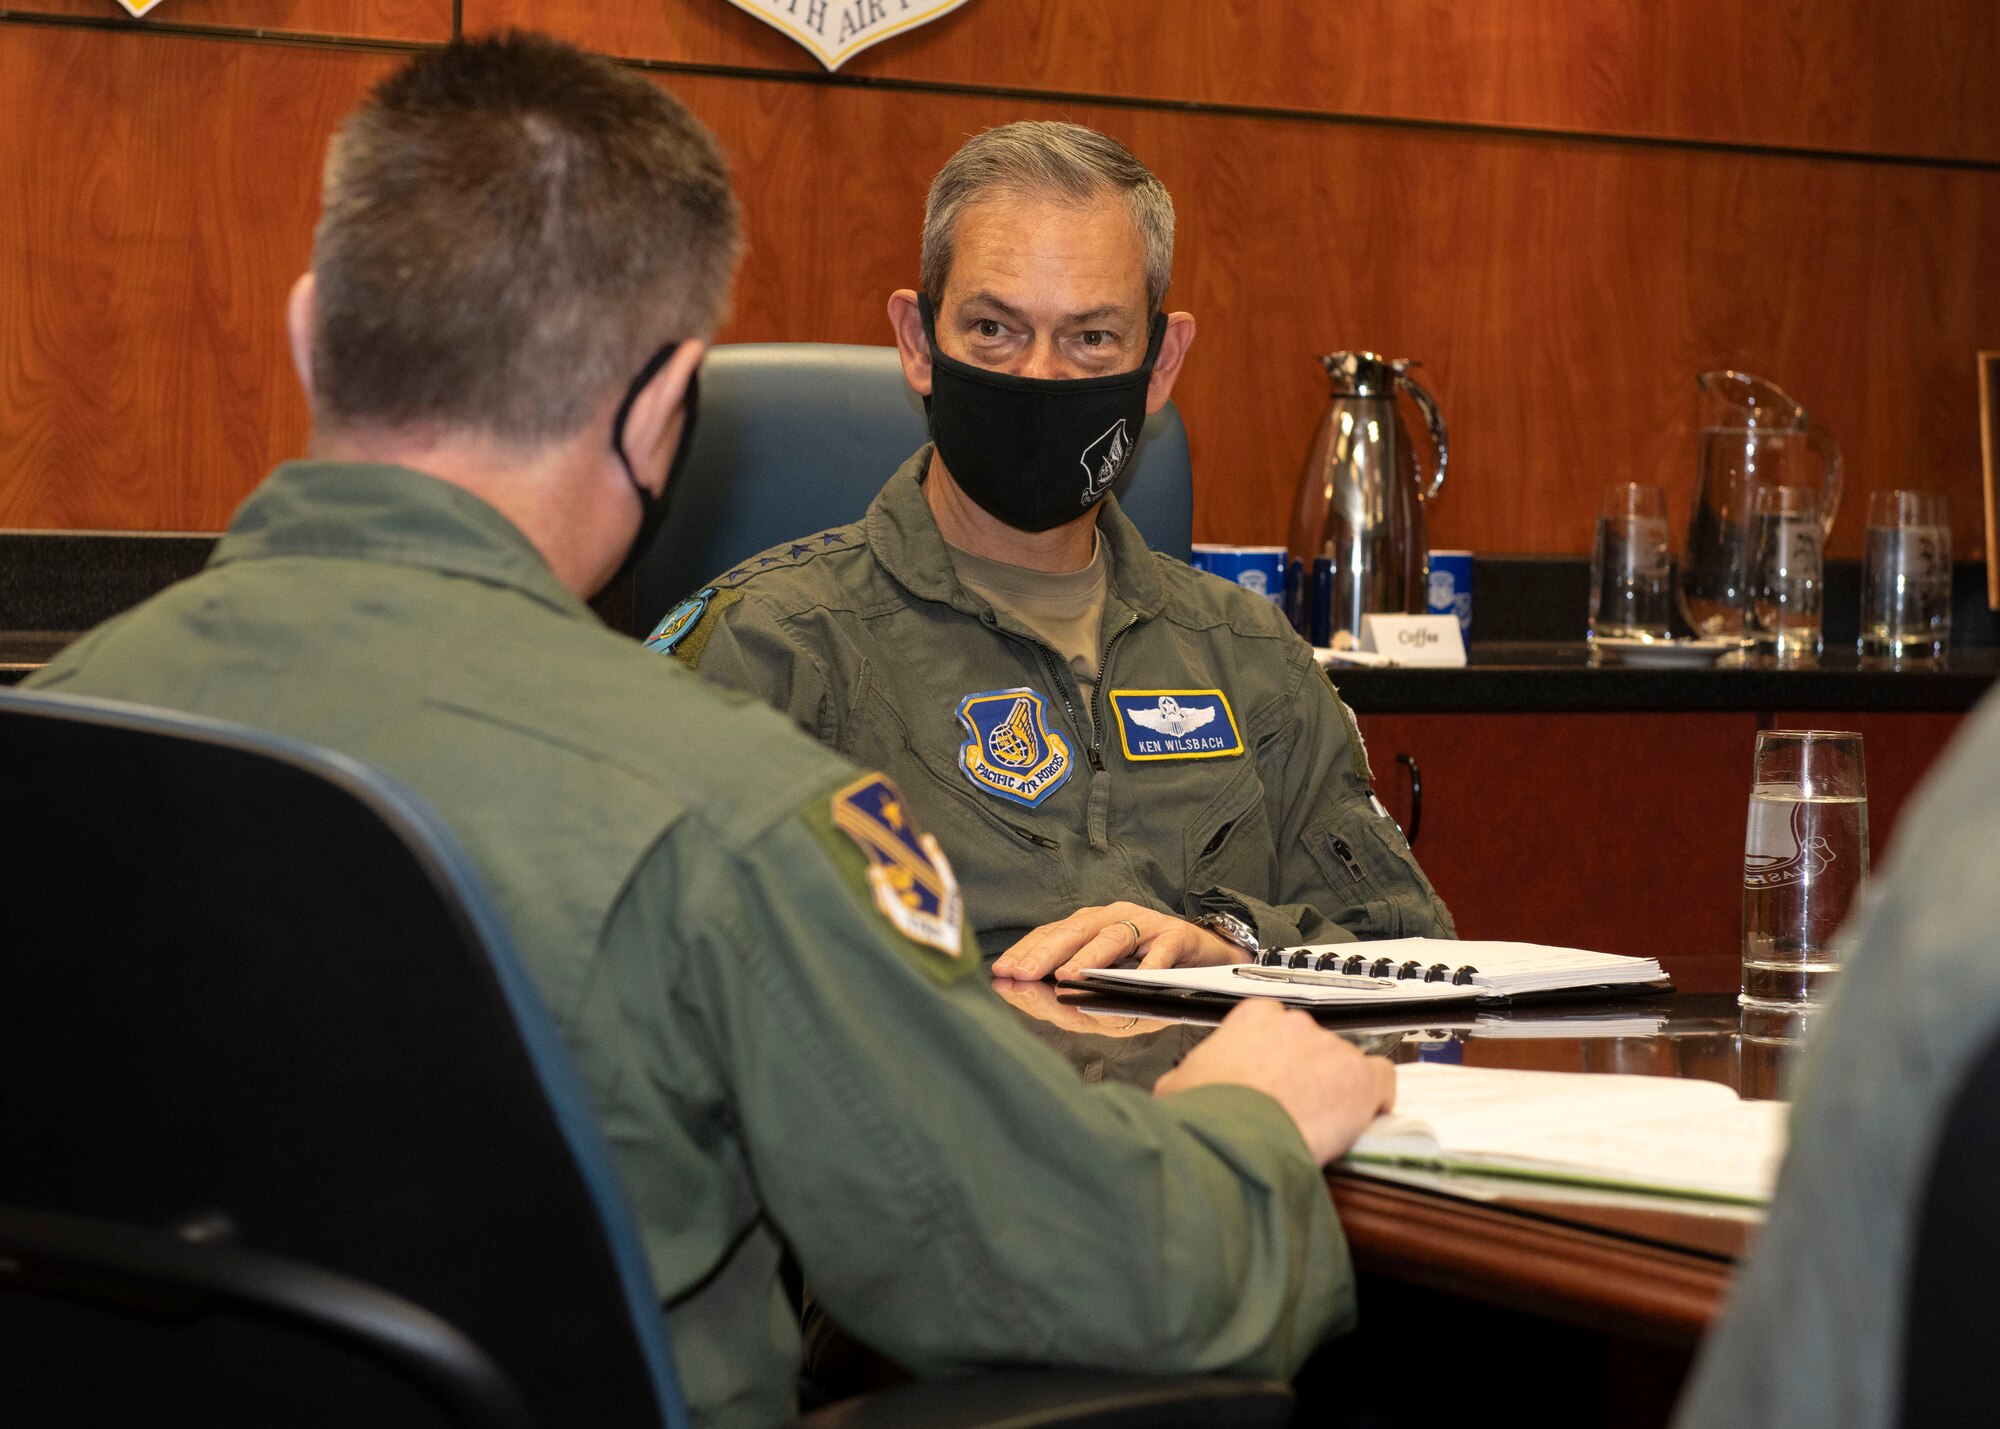 U.S. Air Force Gen. Kenneth Wilsbach, right, the Pacific Air Forces commander, talks to U.S. Air Force Brig. Gen. Anthony Stratton, left, the 176th Wing, Alaska Air National Guard commander, about the Alaska Air National Guard’s mission at Joint Base Elmendorf-Richardson, Alaska, Feb. 16, 2021. PACAF leadership conducted an immersion tour of JBER to learn about the installation's role in readiness and defense in the Arctic as well as focusing on how the base remains postured for the future through innovative ideas.